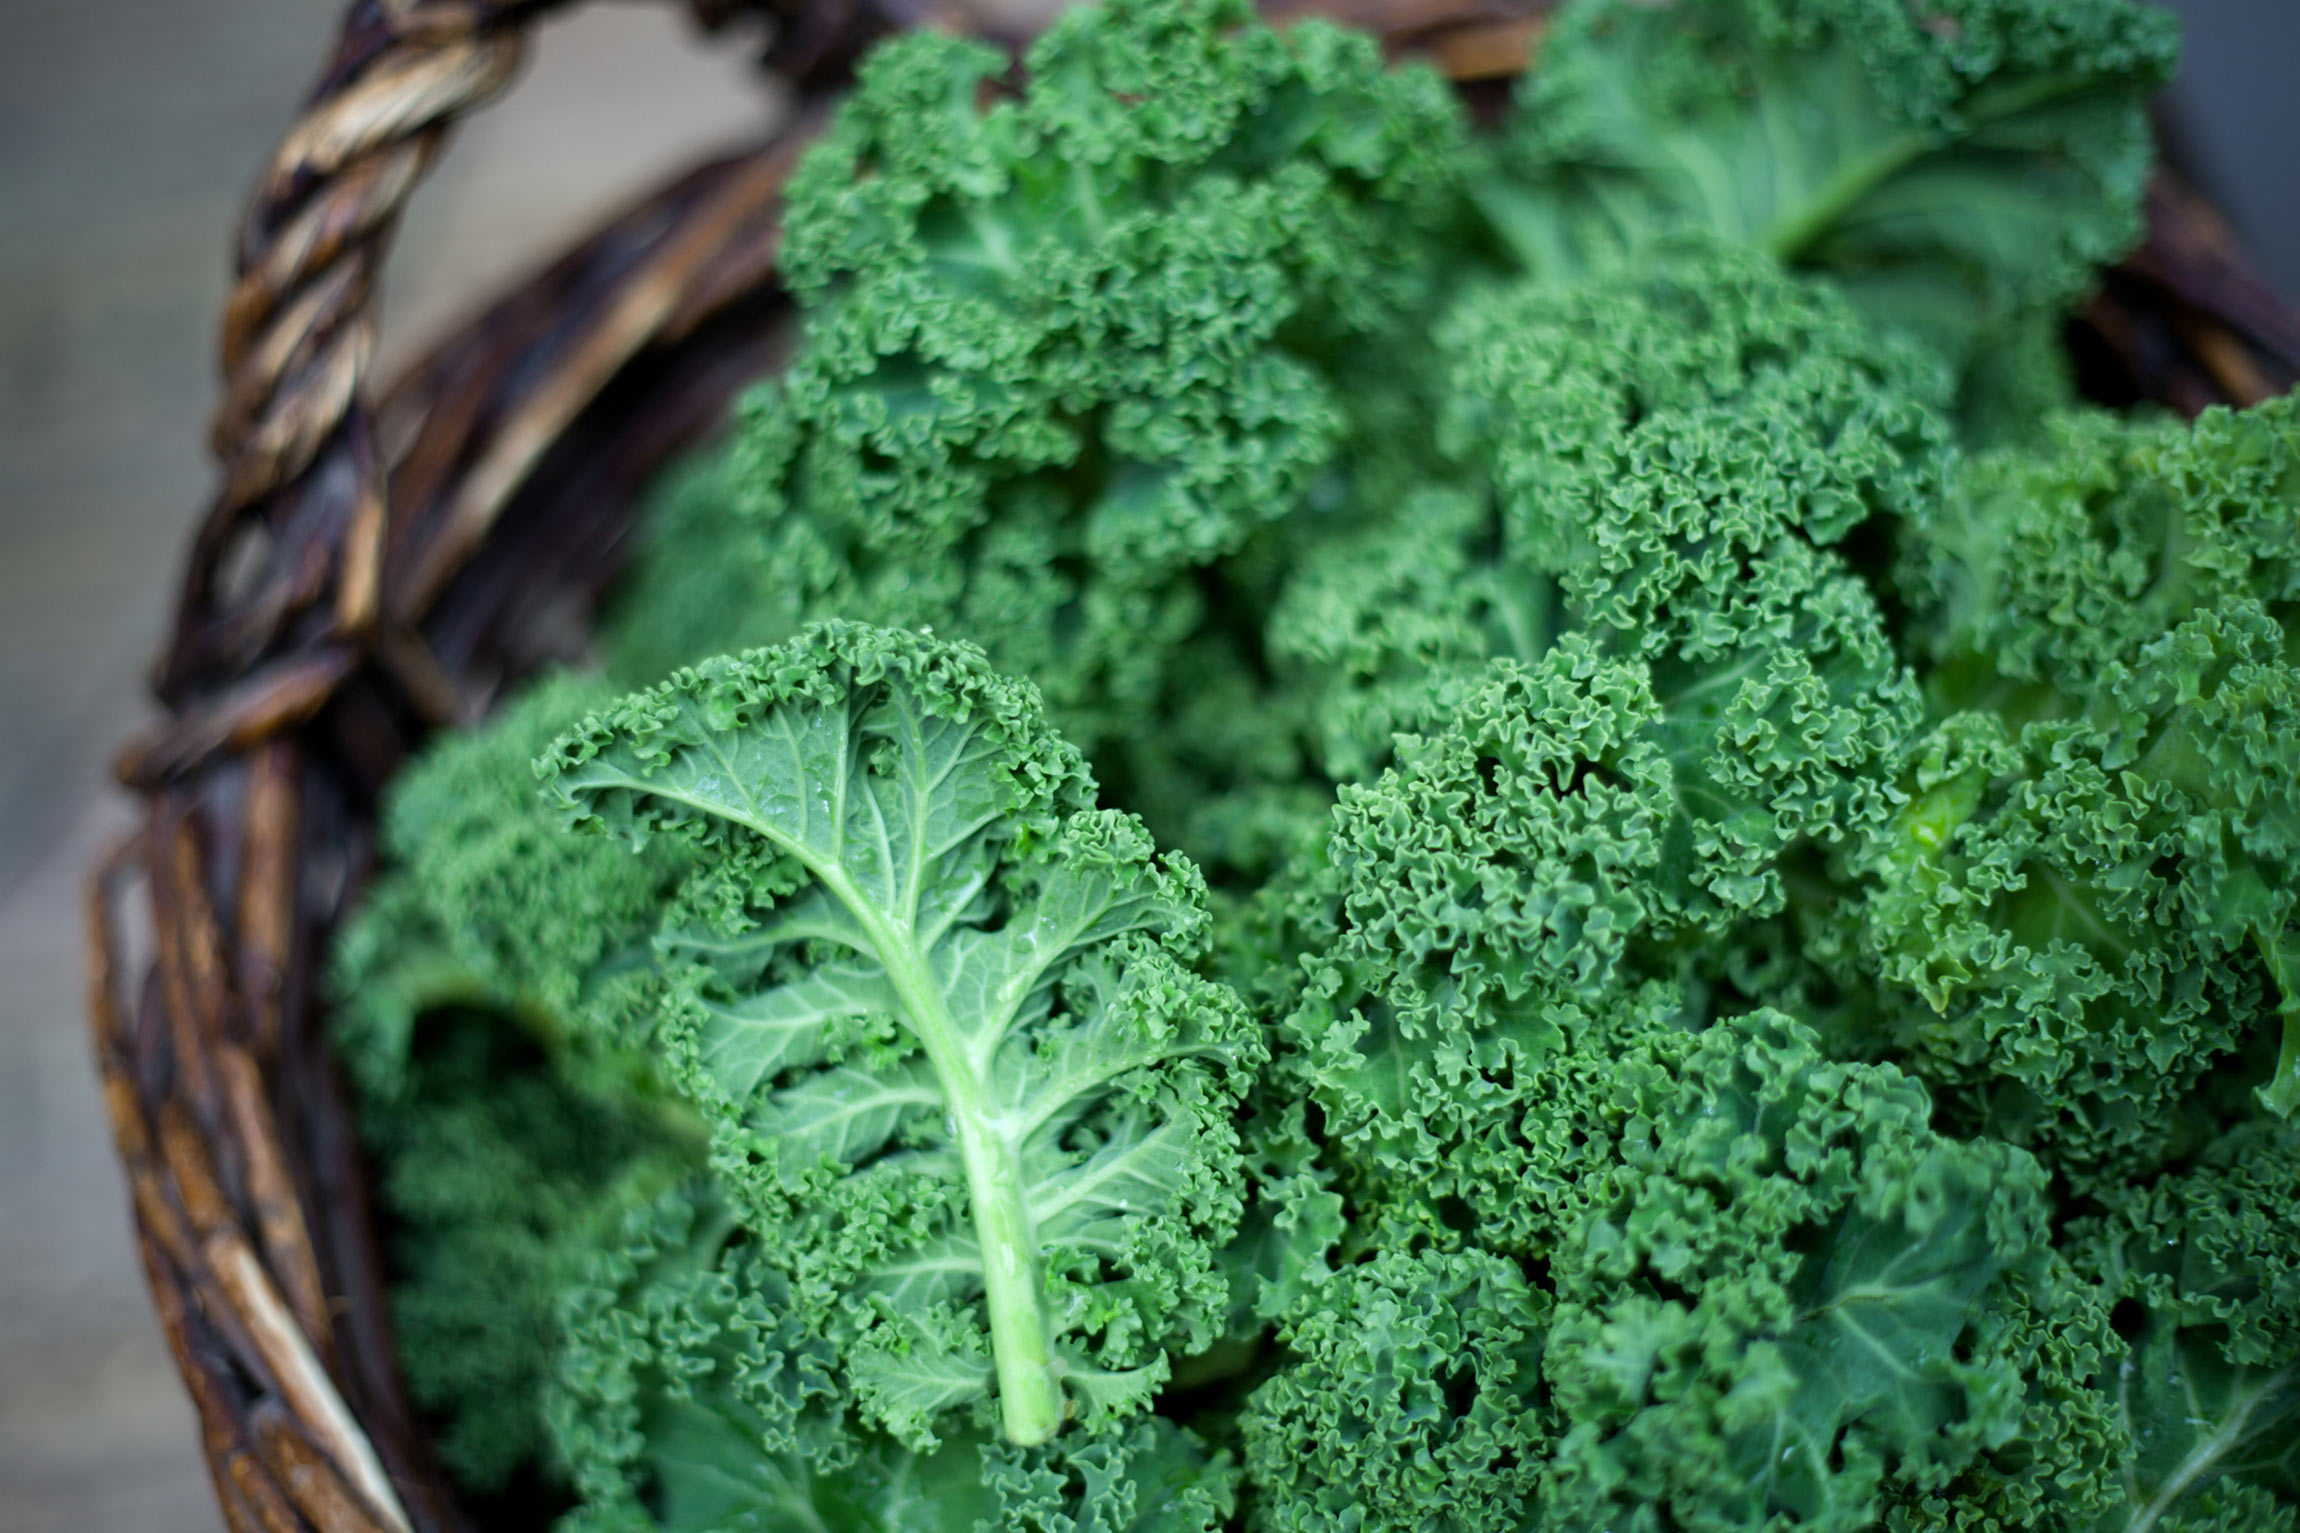 Fall fruits and vegetables: what's in season? Kale.